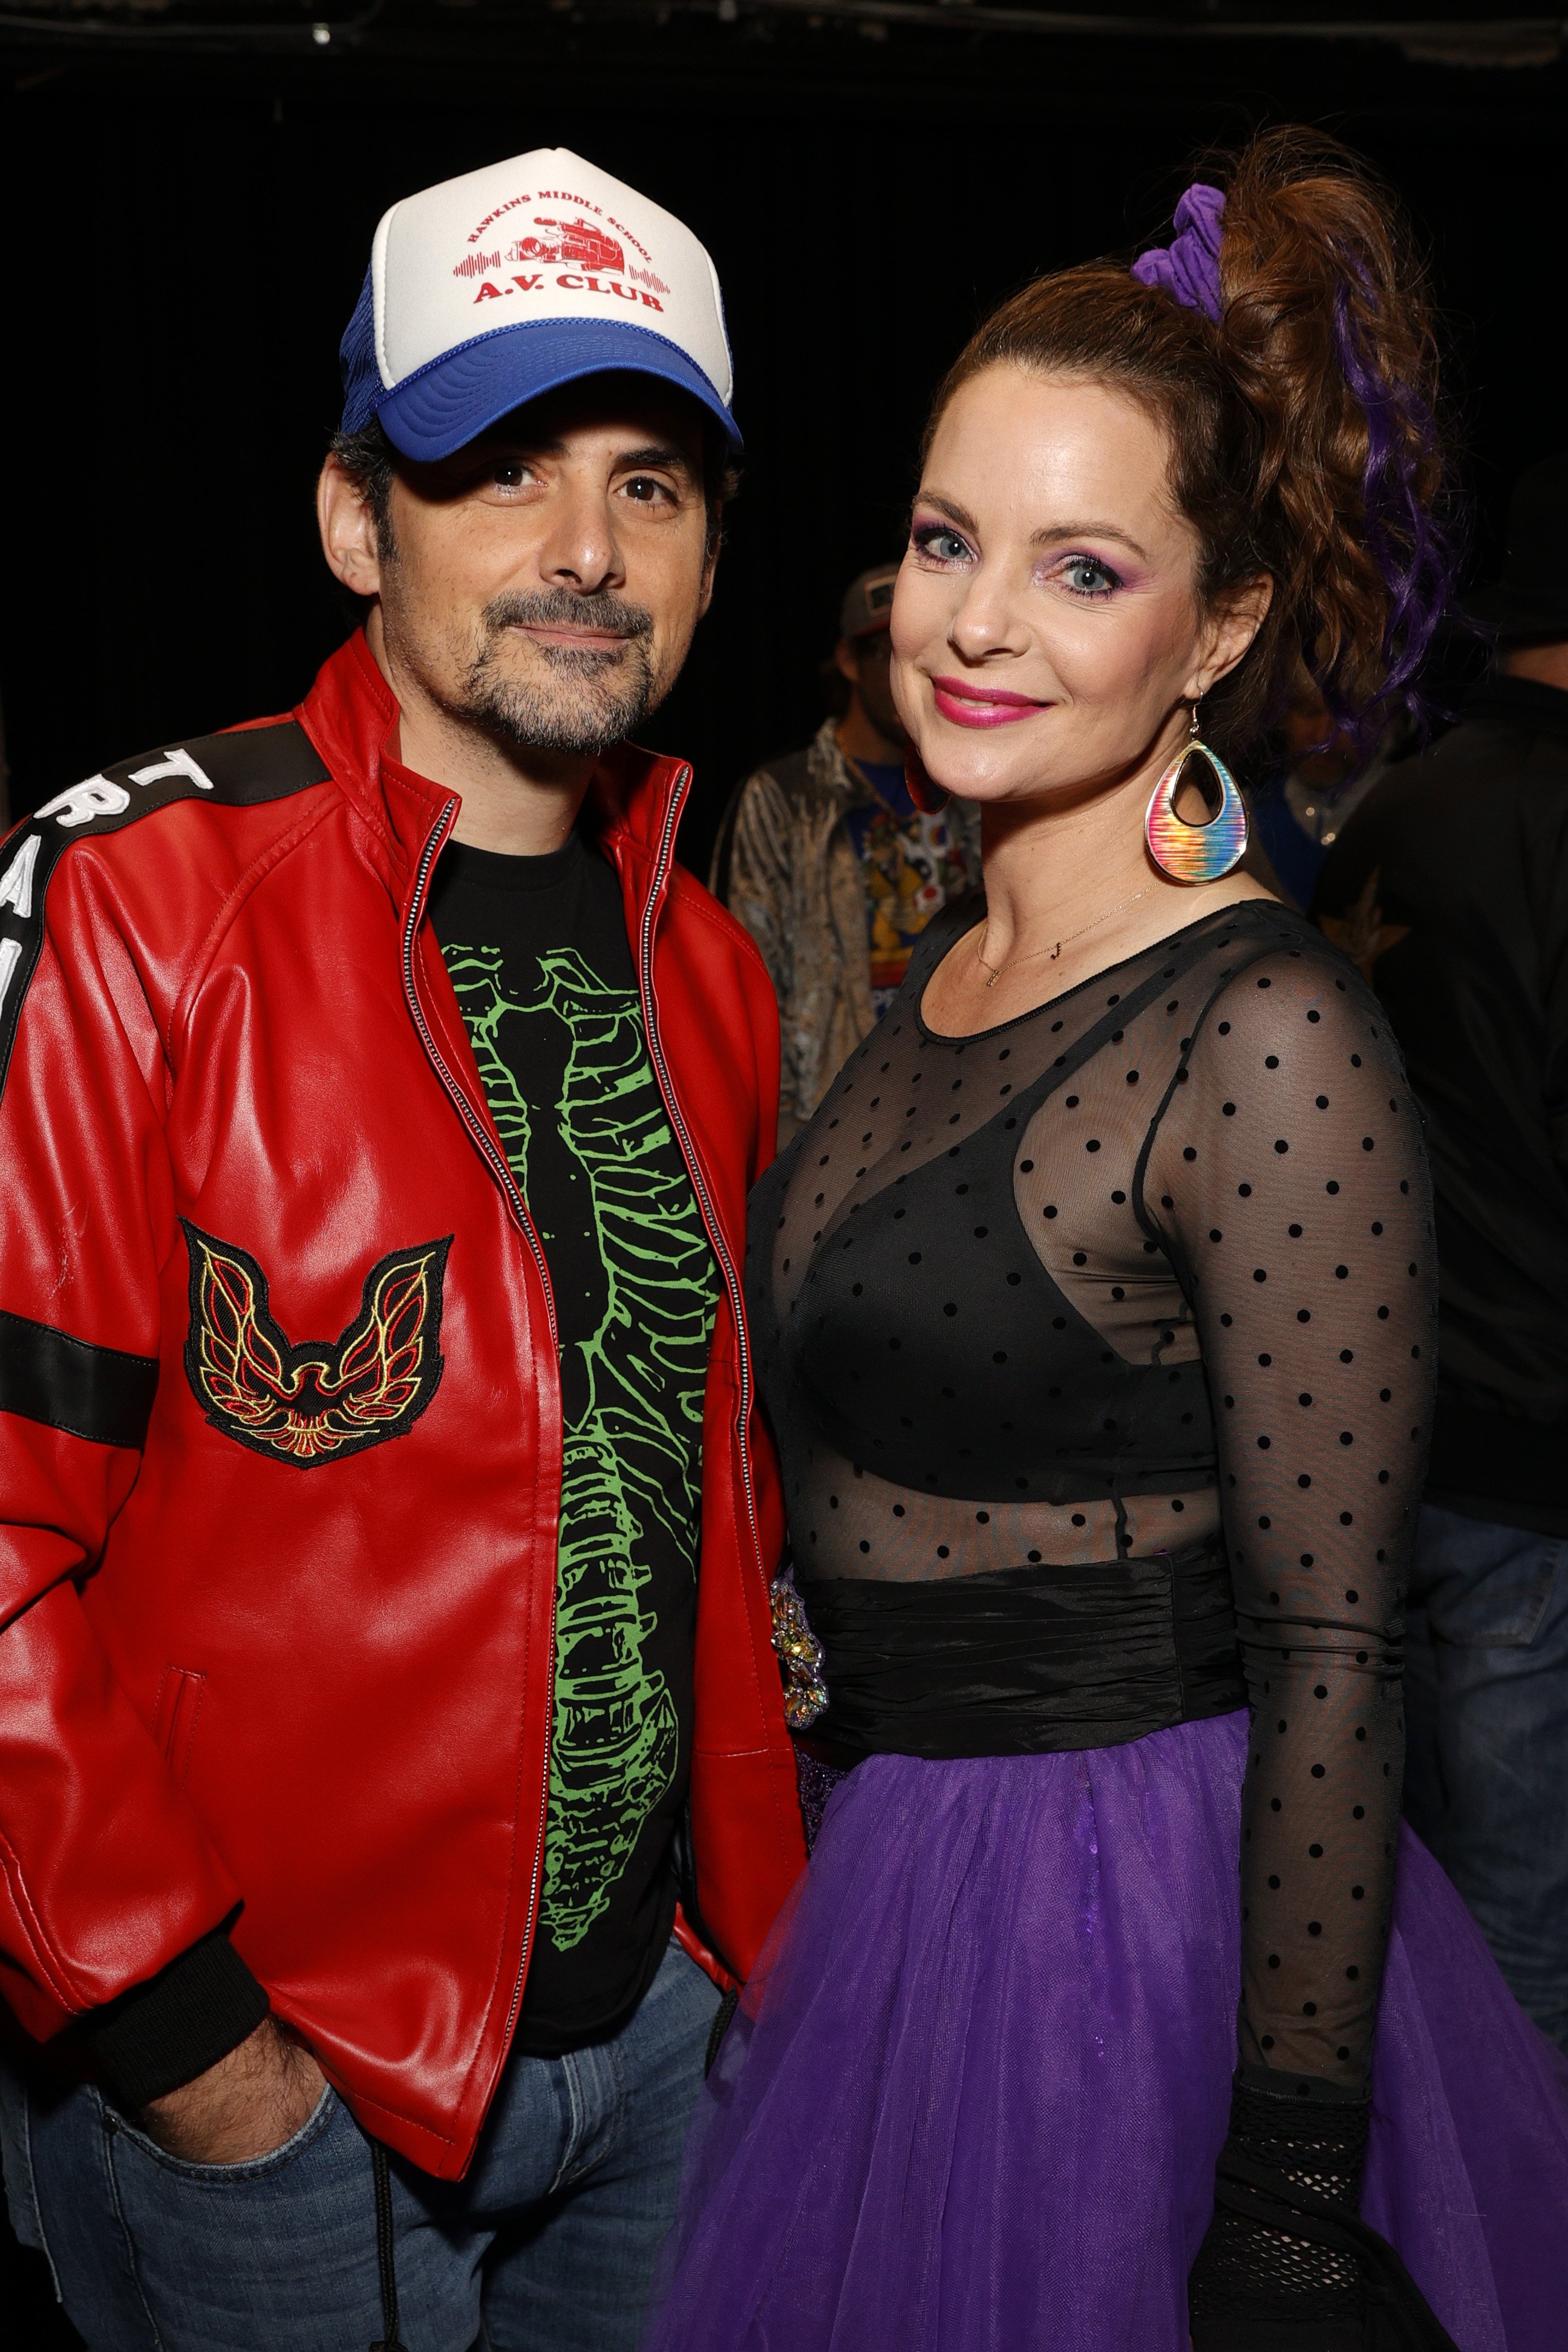 Brad Paisley and Kimberly Williams at the '80s Dance Party to End ALZ benefiting the Alzheimer's Association at Wildhorse Saloon on November 14, 2021, in Nashville, Tennessee. | Source: Getty Images